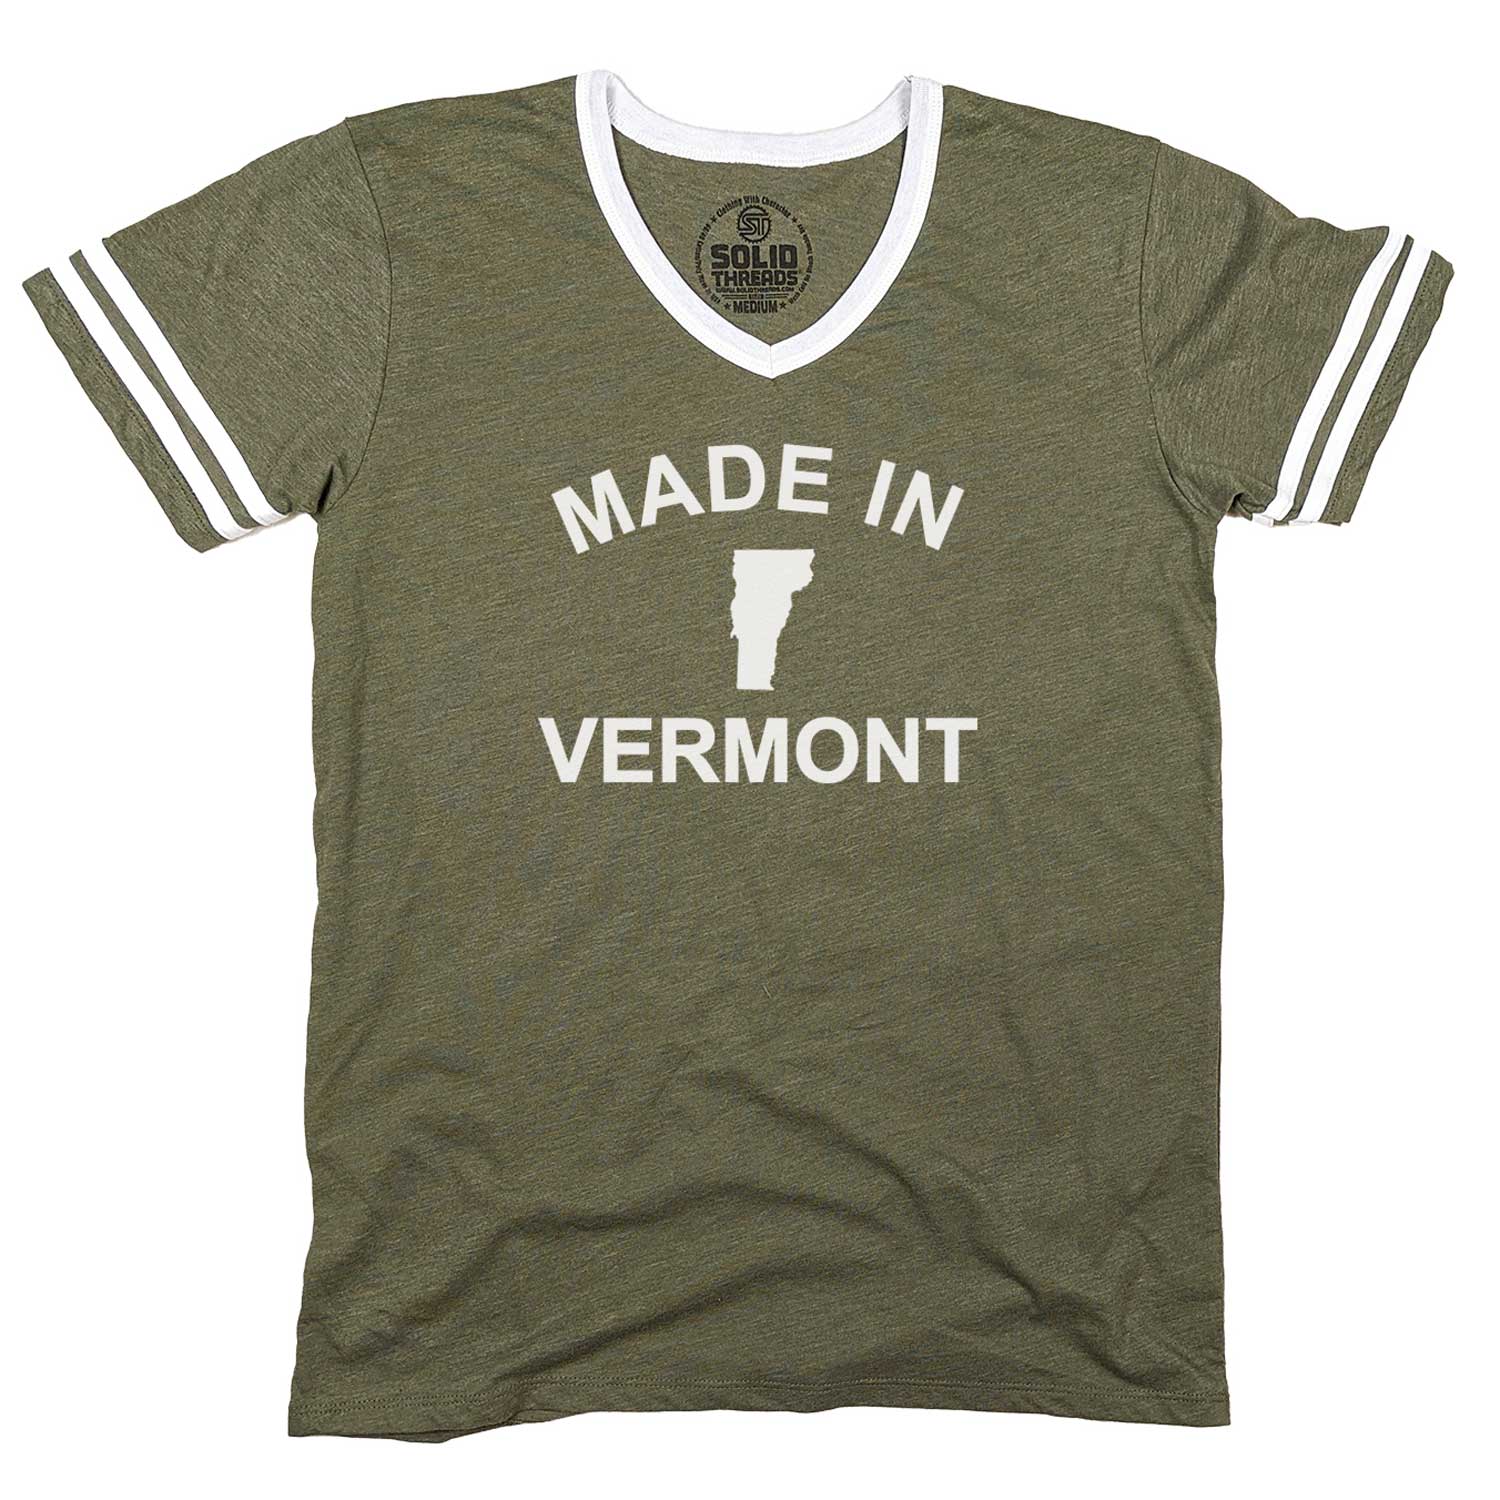 Men's Made in Vermont Vintage Graphic V-Neck Tee | Retro Green Mountains T-Shirt | Solid Threads